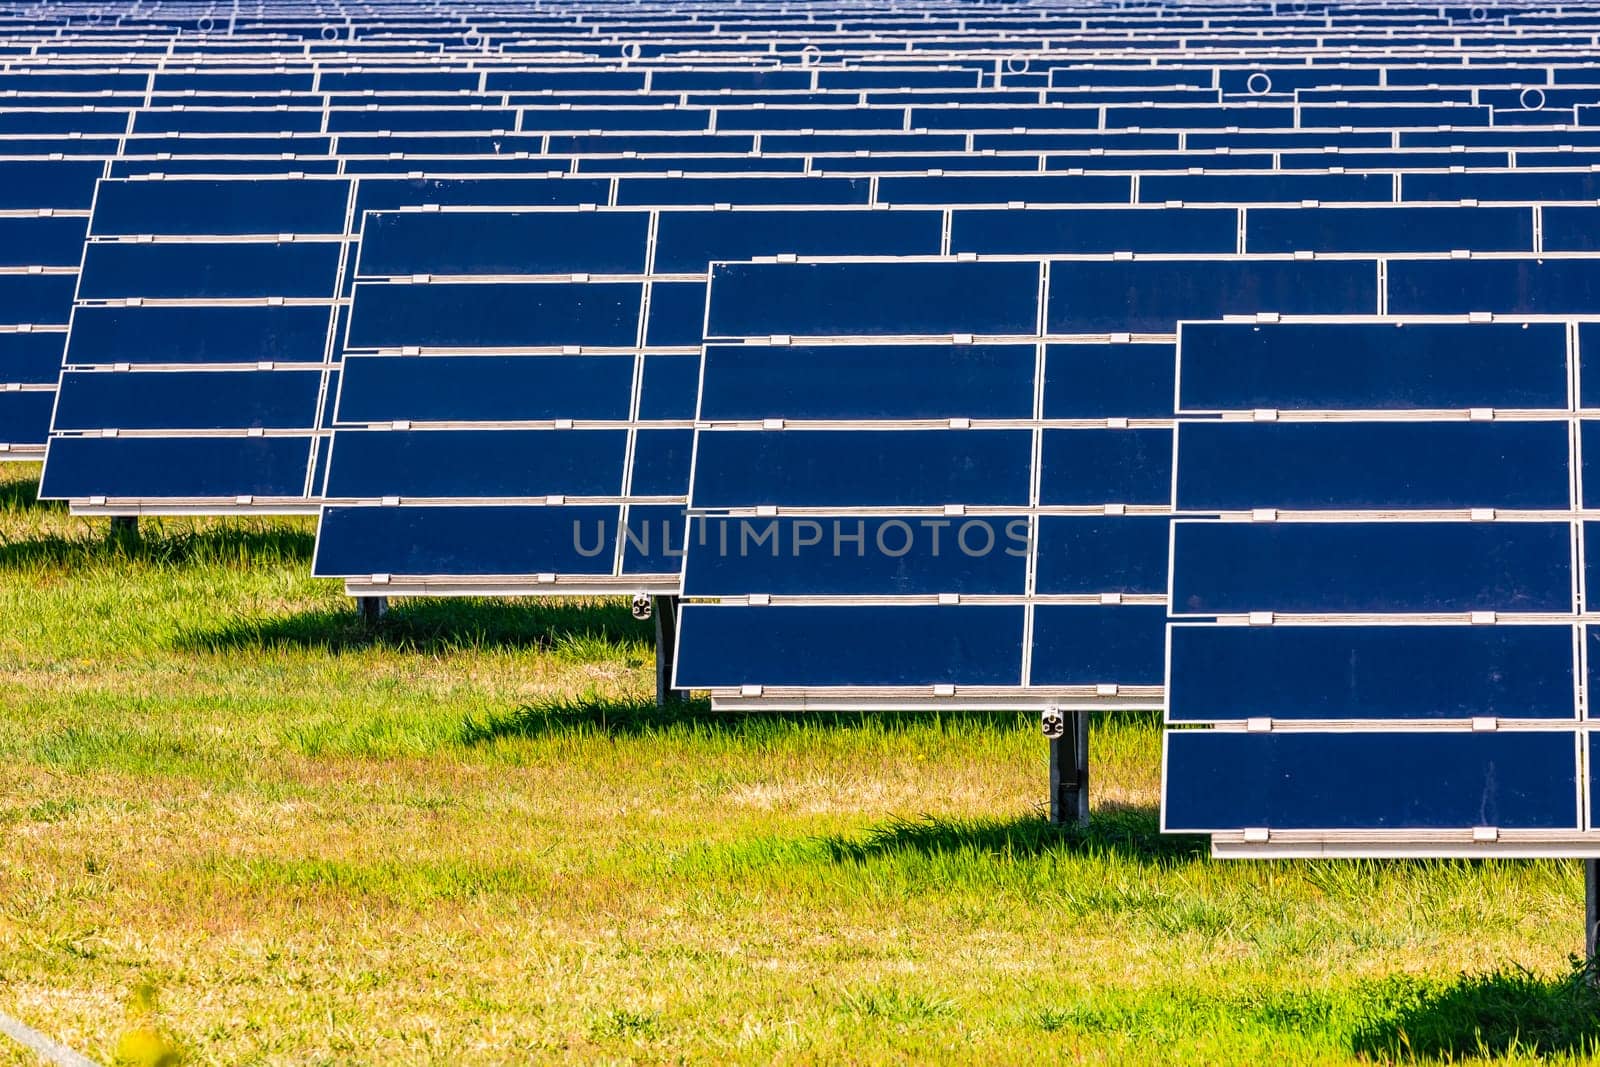 Solar panels of a PV system on a rural field for renewable energy generation by astrosoft